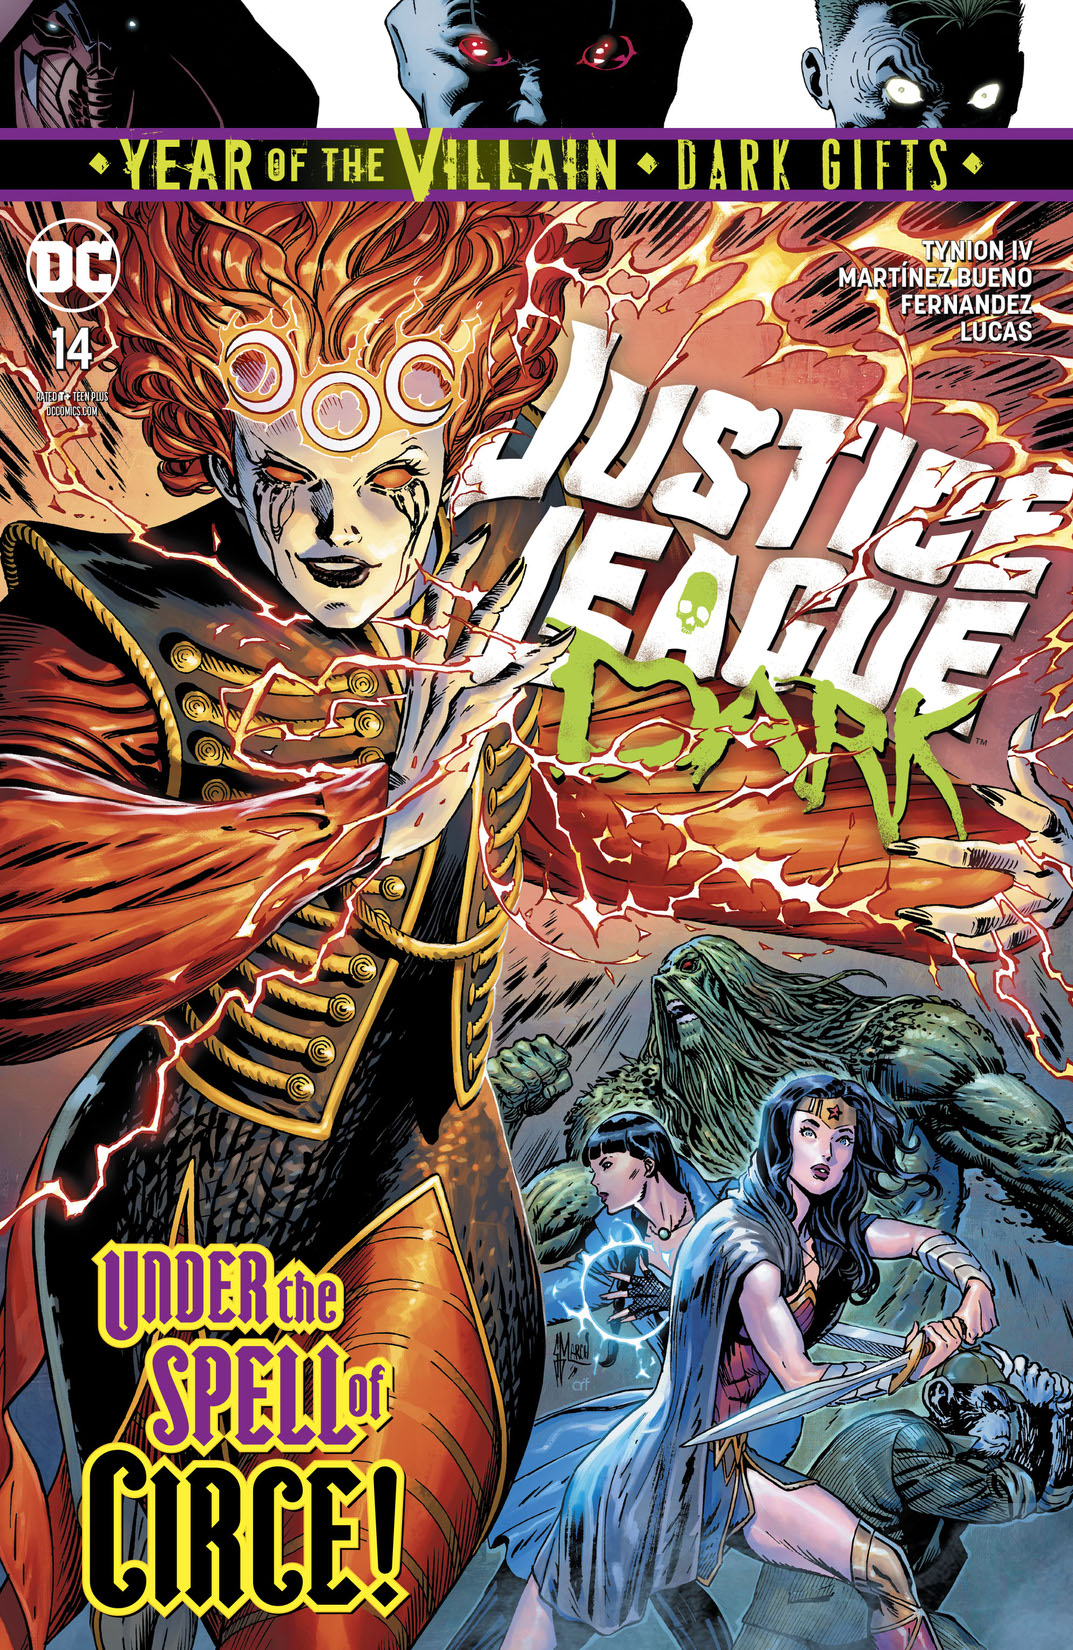 Justice League Dark (2018-) #14 preview images